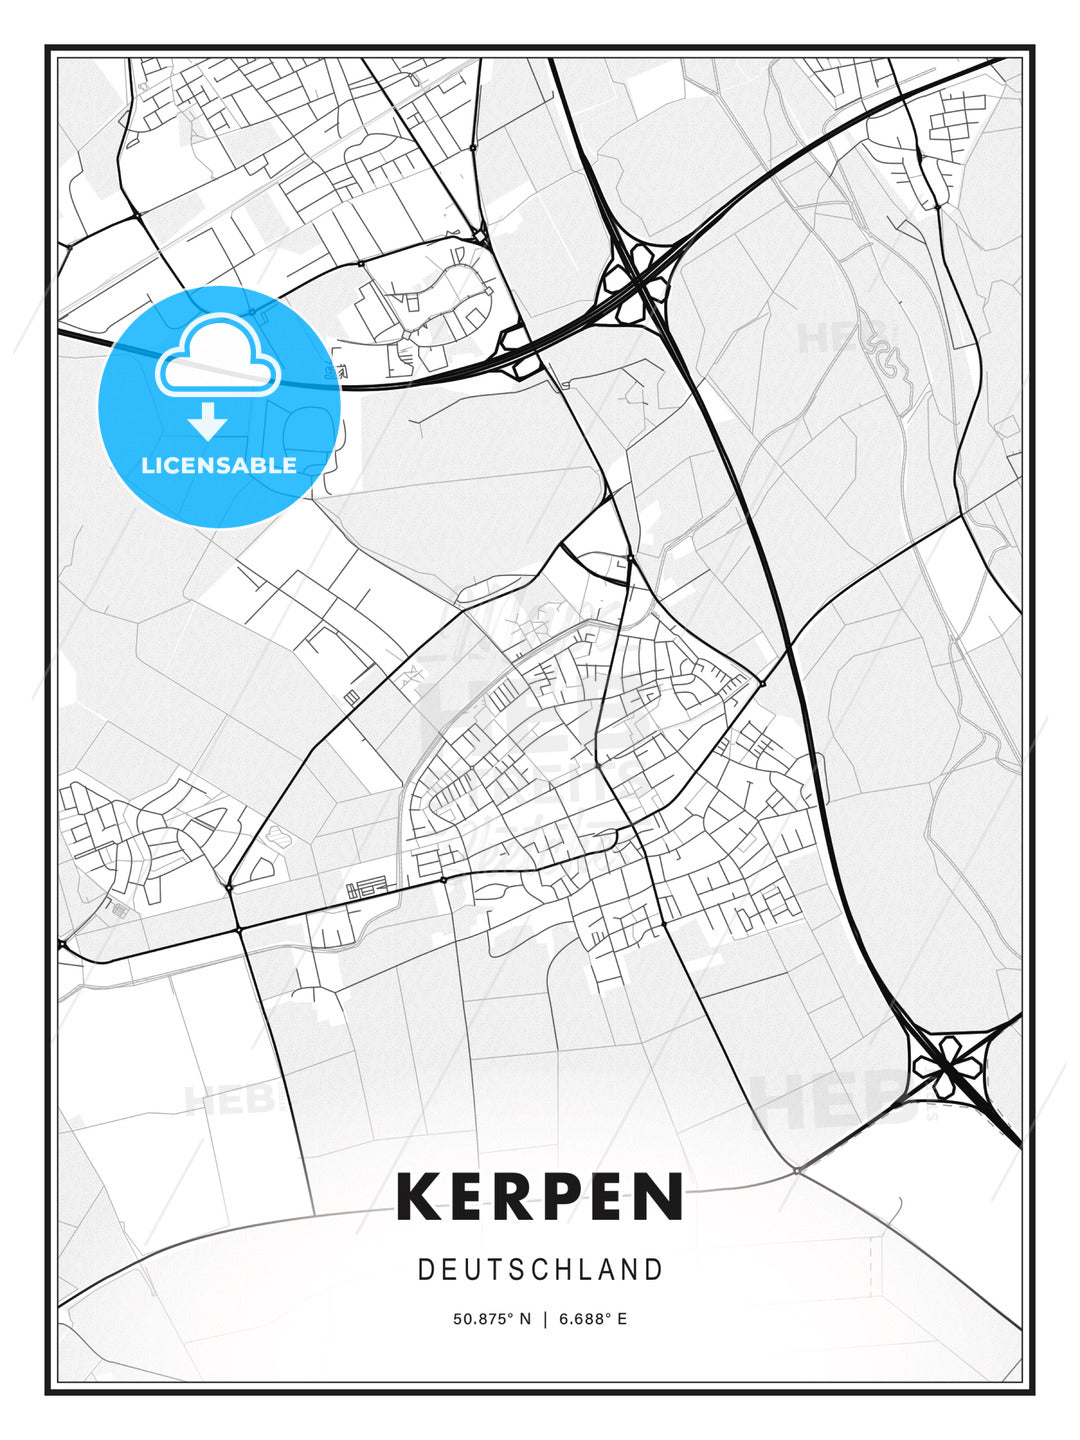 Kerpen, Germany, Modern Print Template in Various Formats - HEBSTREITS Sketches